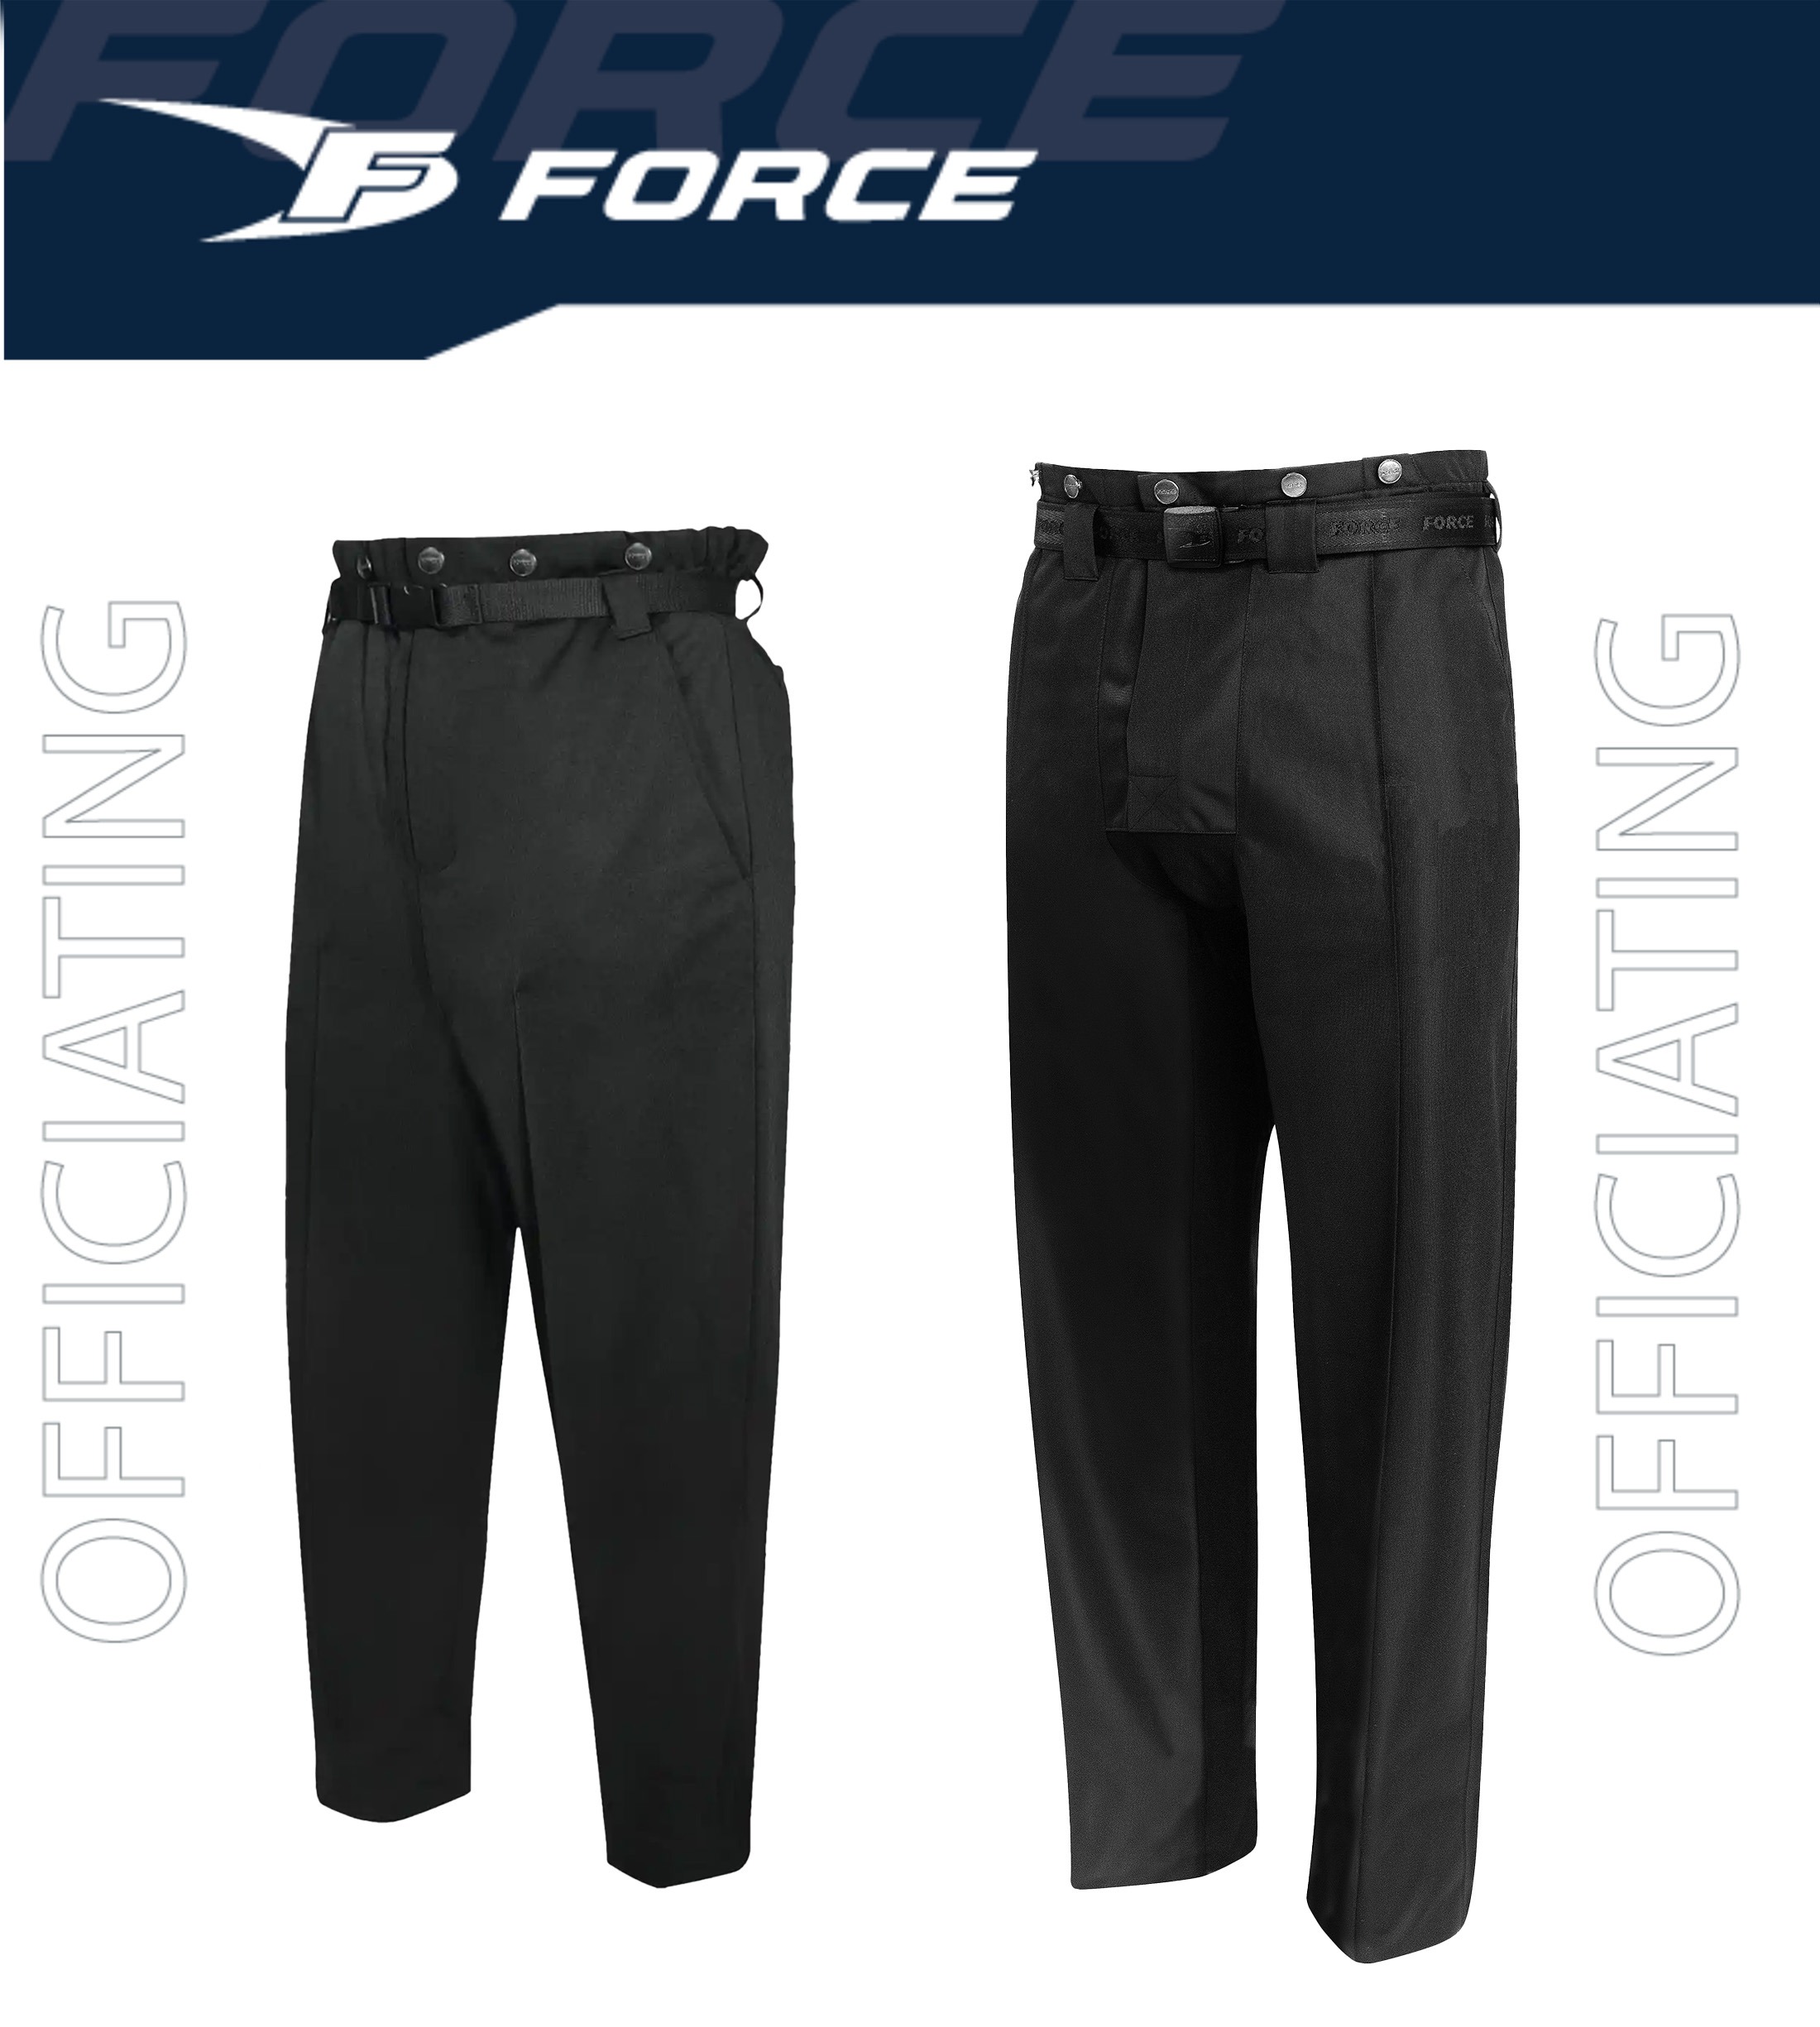 Raise Lifting Suit - Force Sports Store